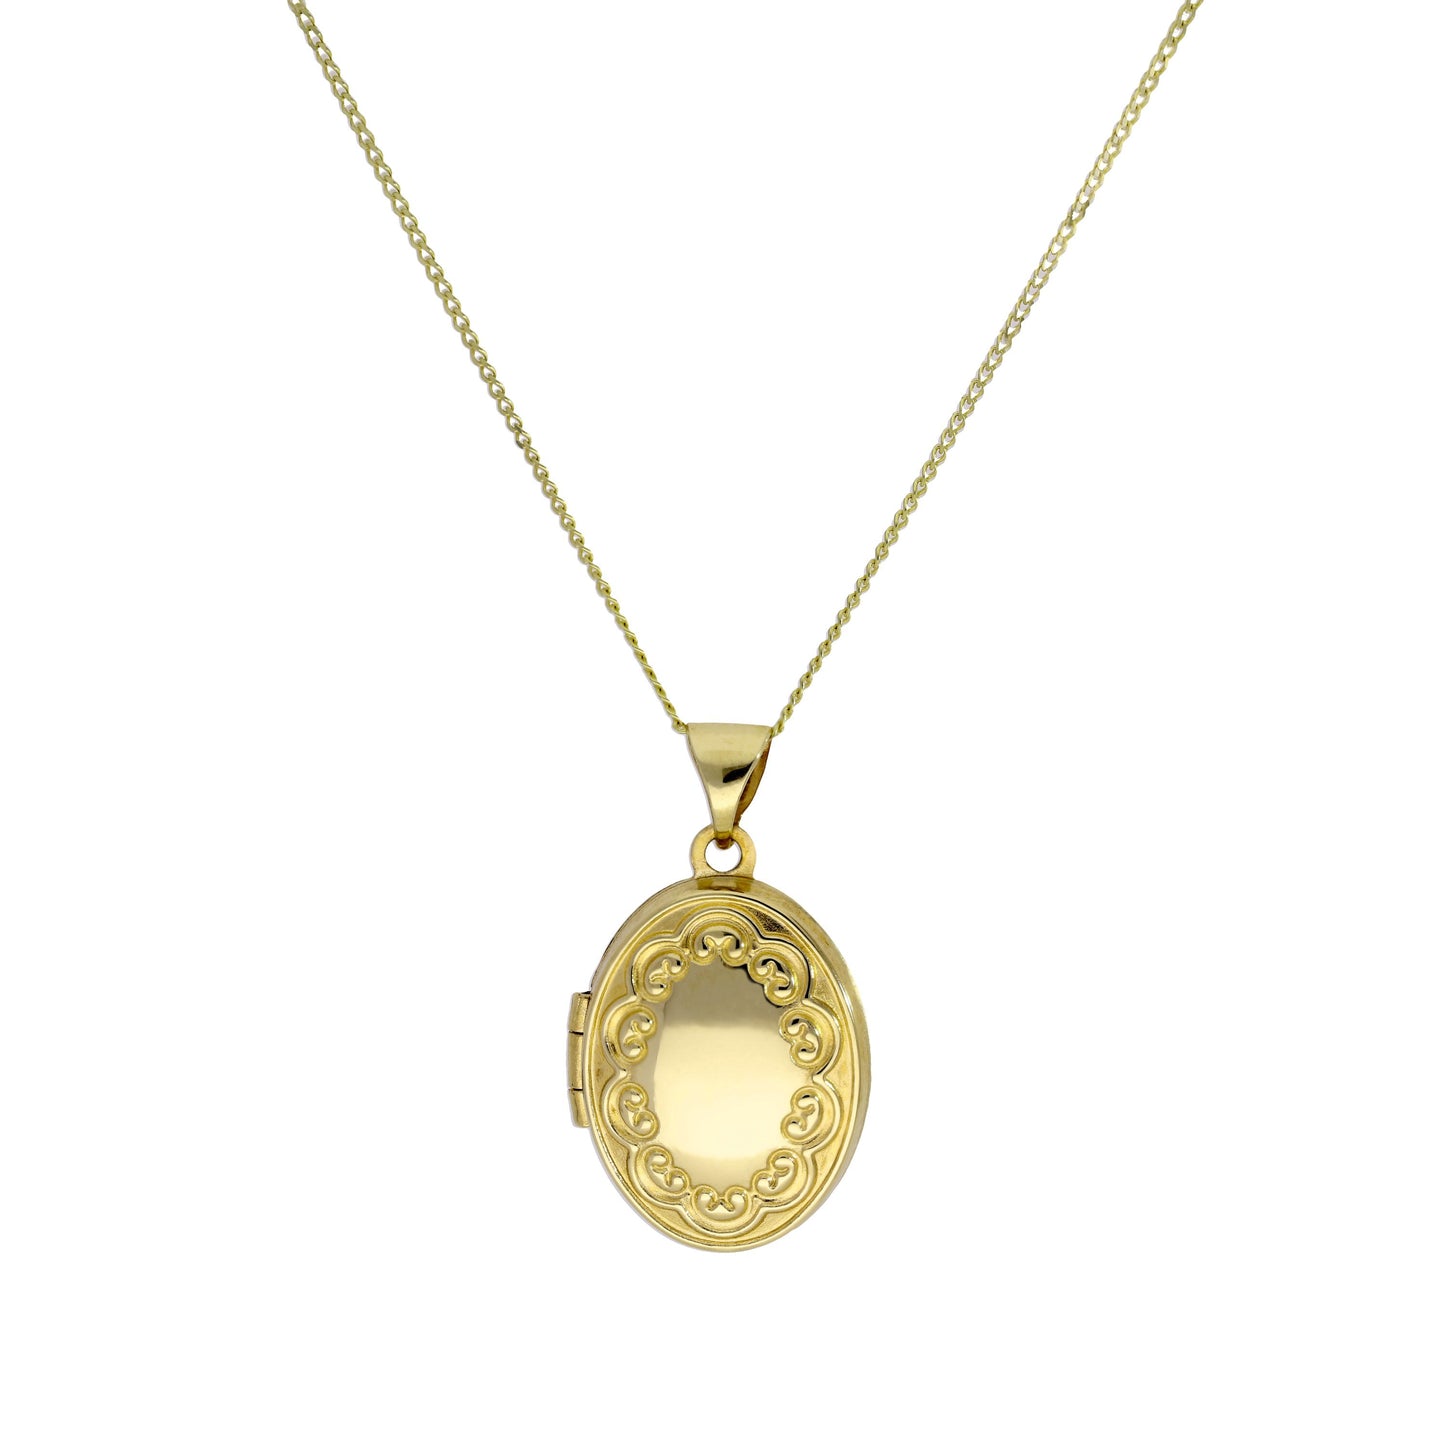 9ct Gold Oval Locket on Chain with Floral Design on Chain 16 - 18 Inches